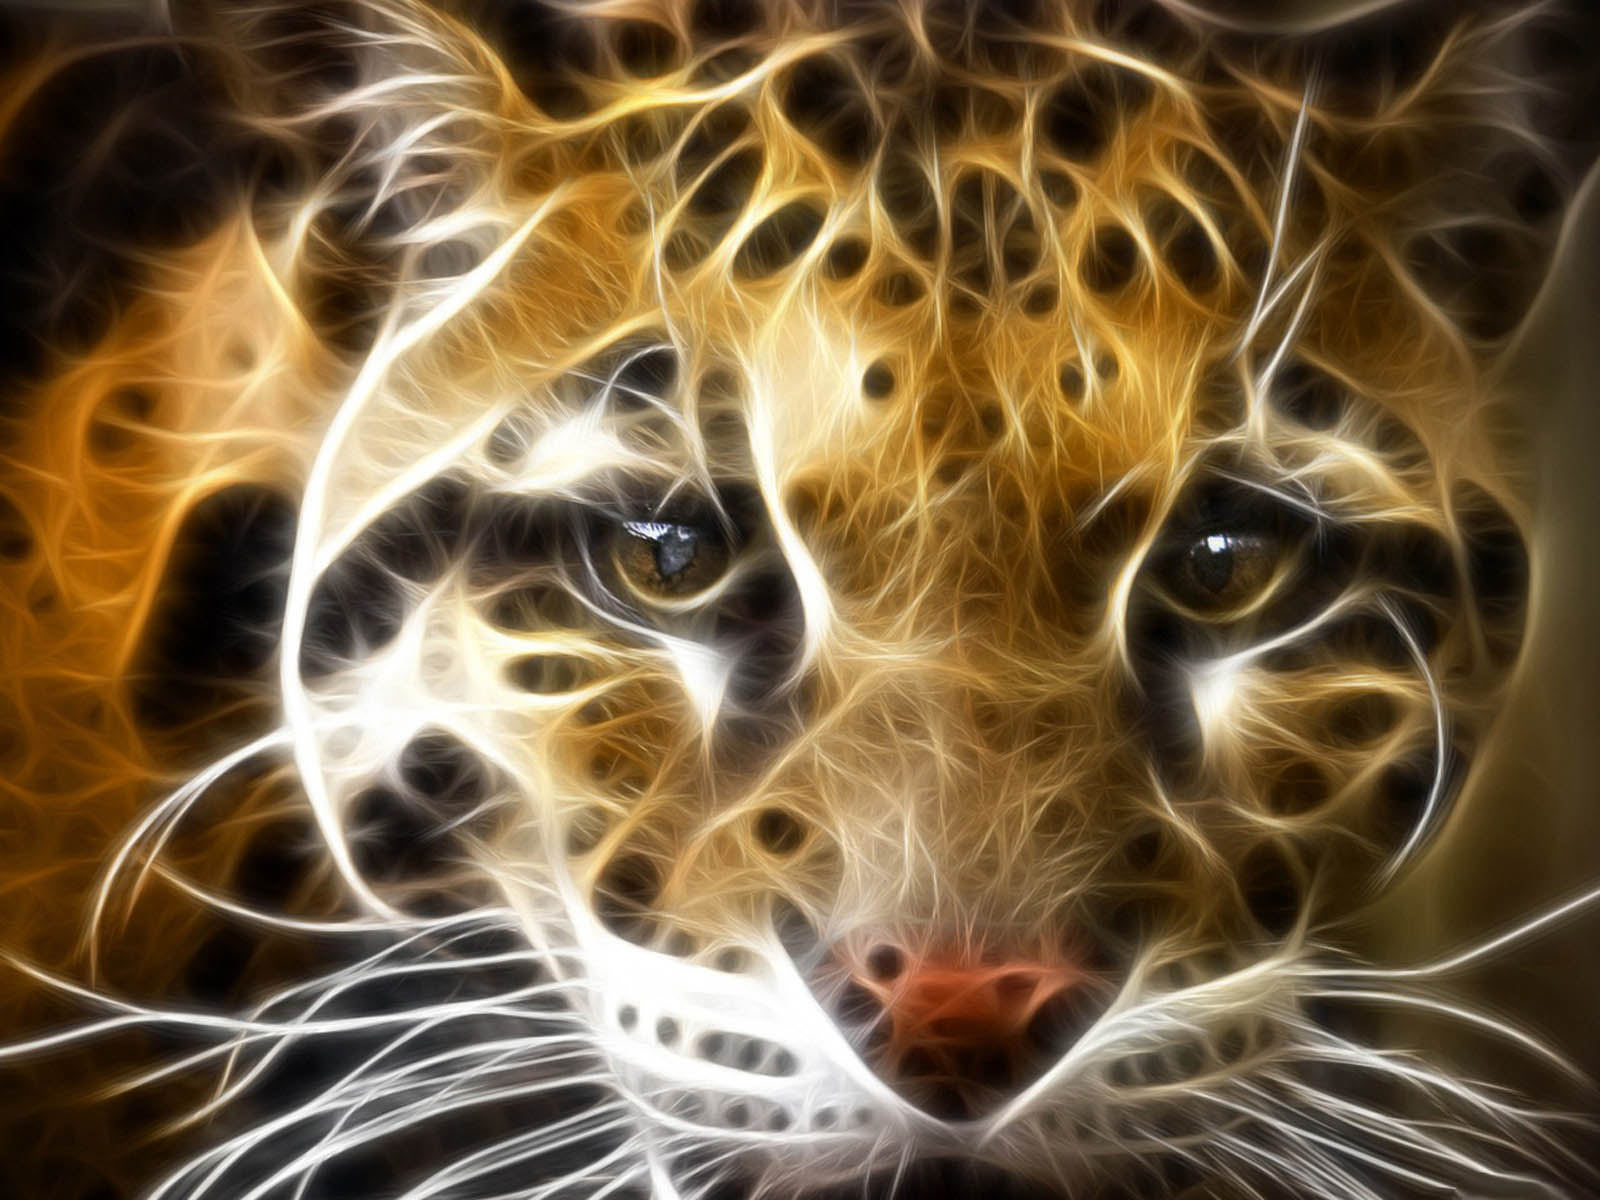  Tiger 3D Wallpapers Images Photos Pictures and Backgrounds for 1600x1200